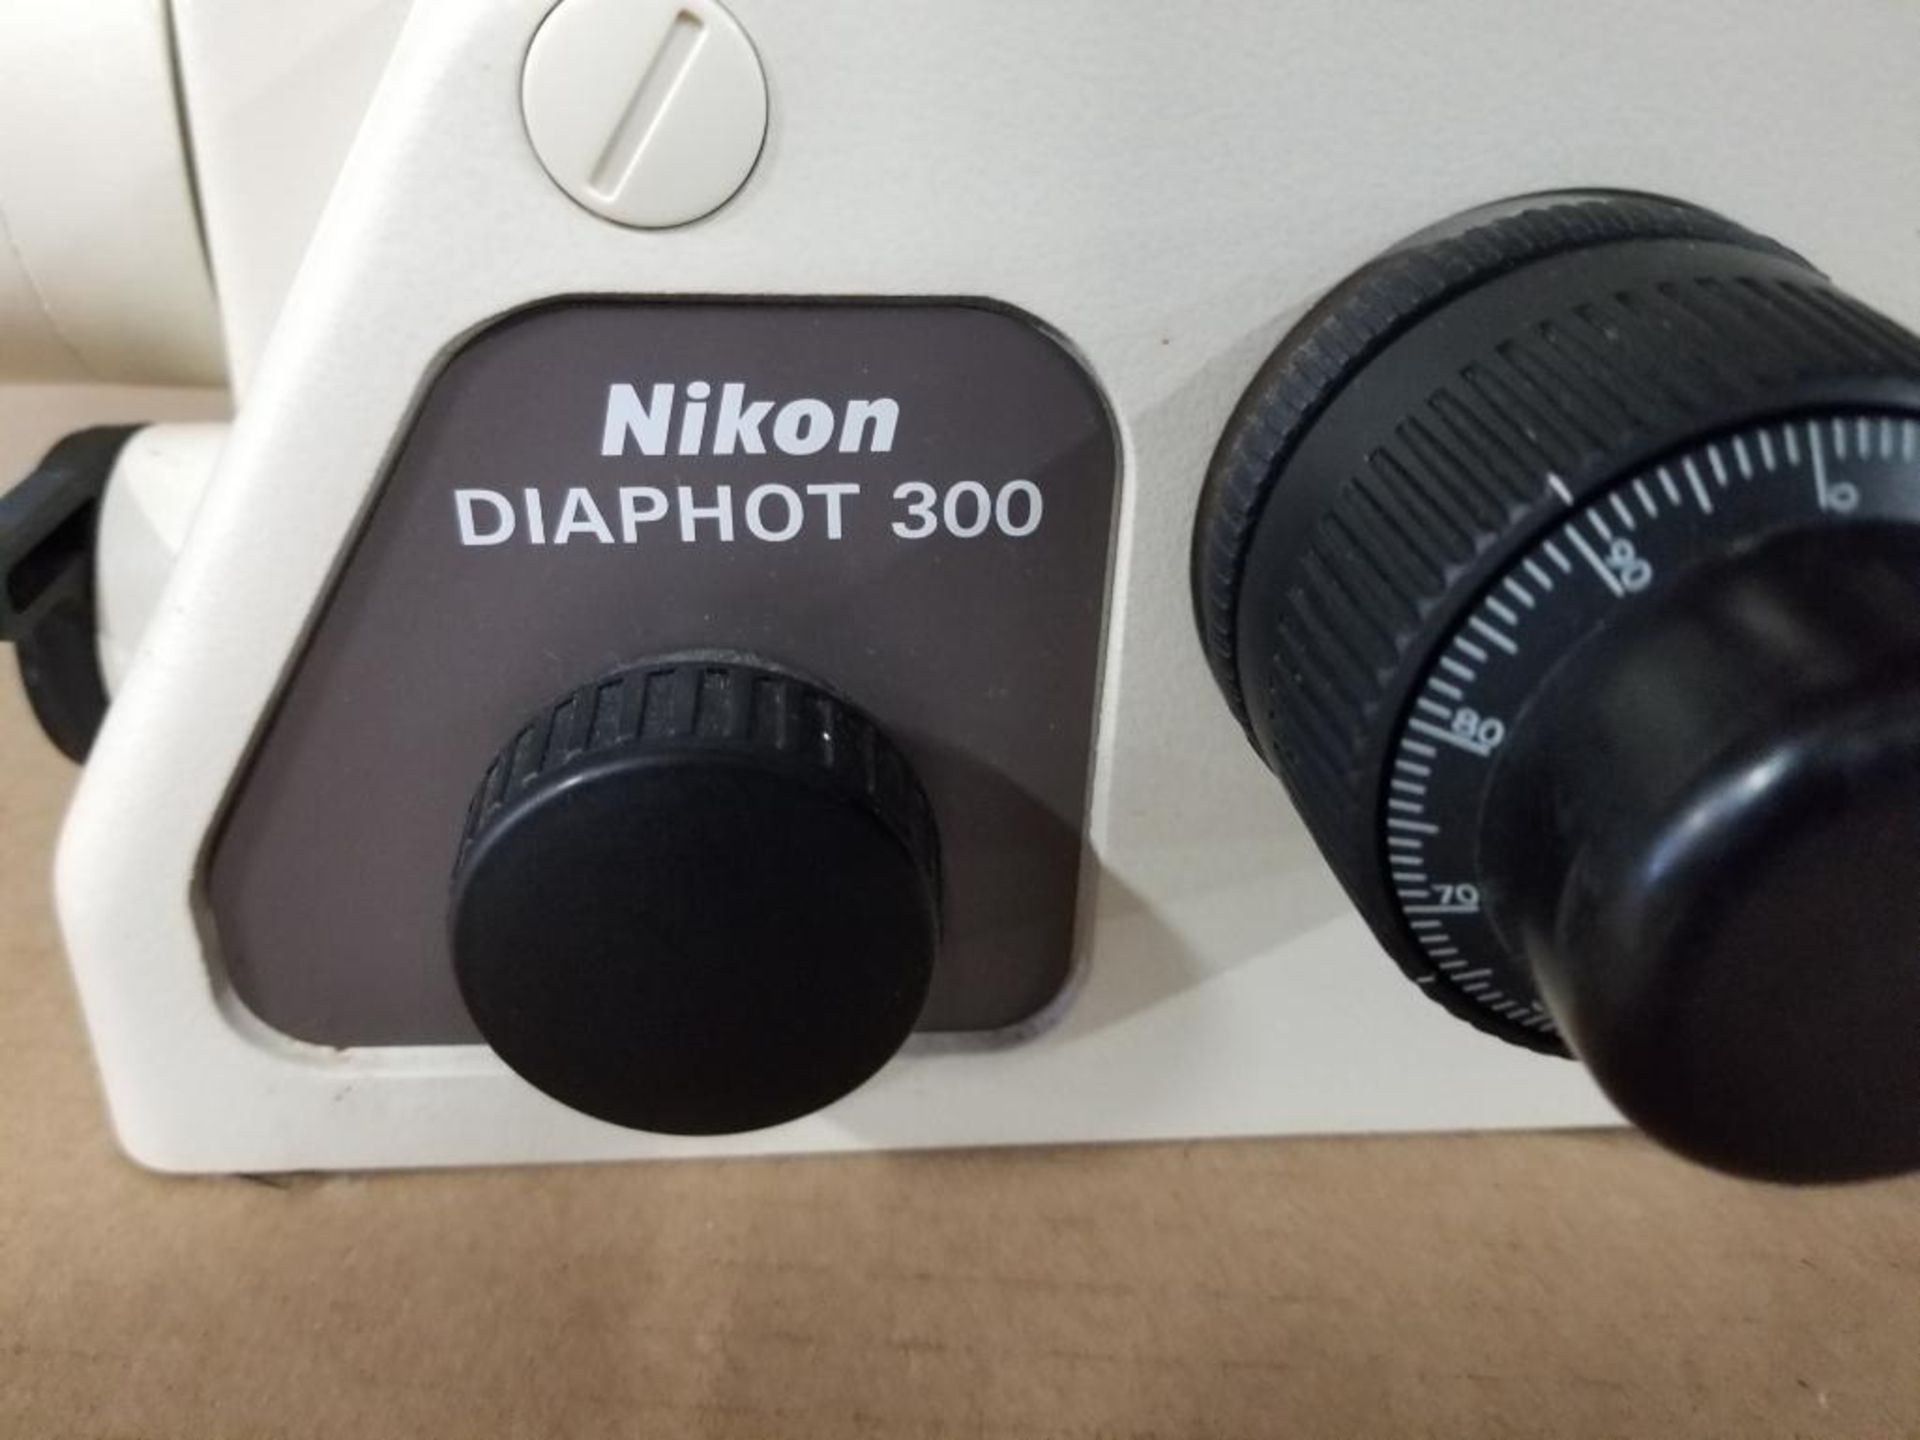 Nikon Diaphot 300 inverted fluorescent phase contrast microscope. S/N:310094 - Image 8 of 11